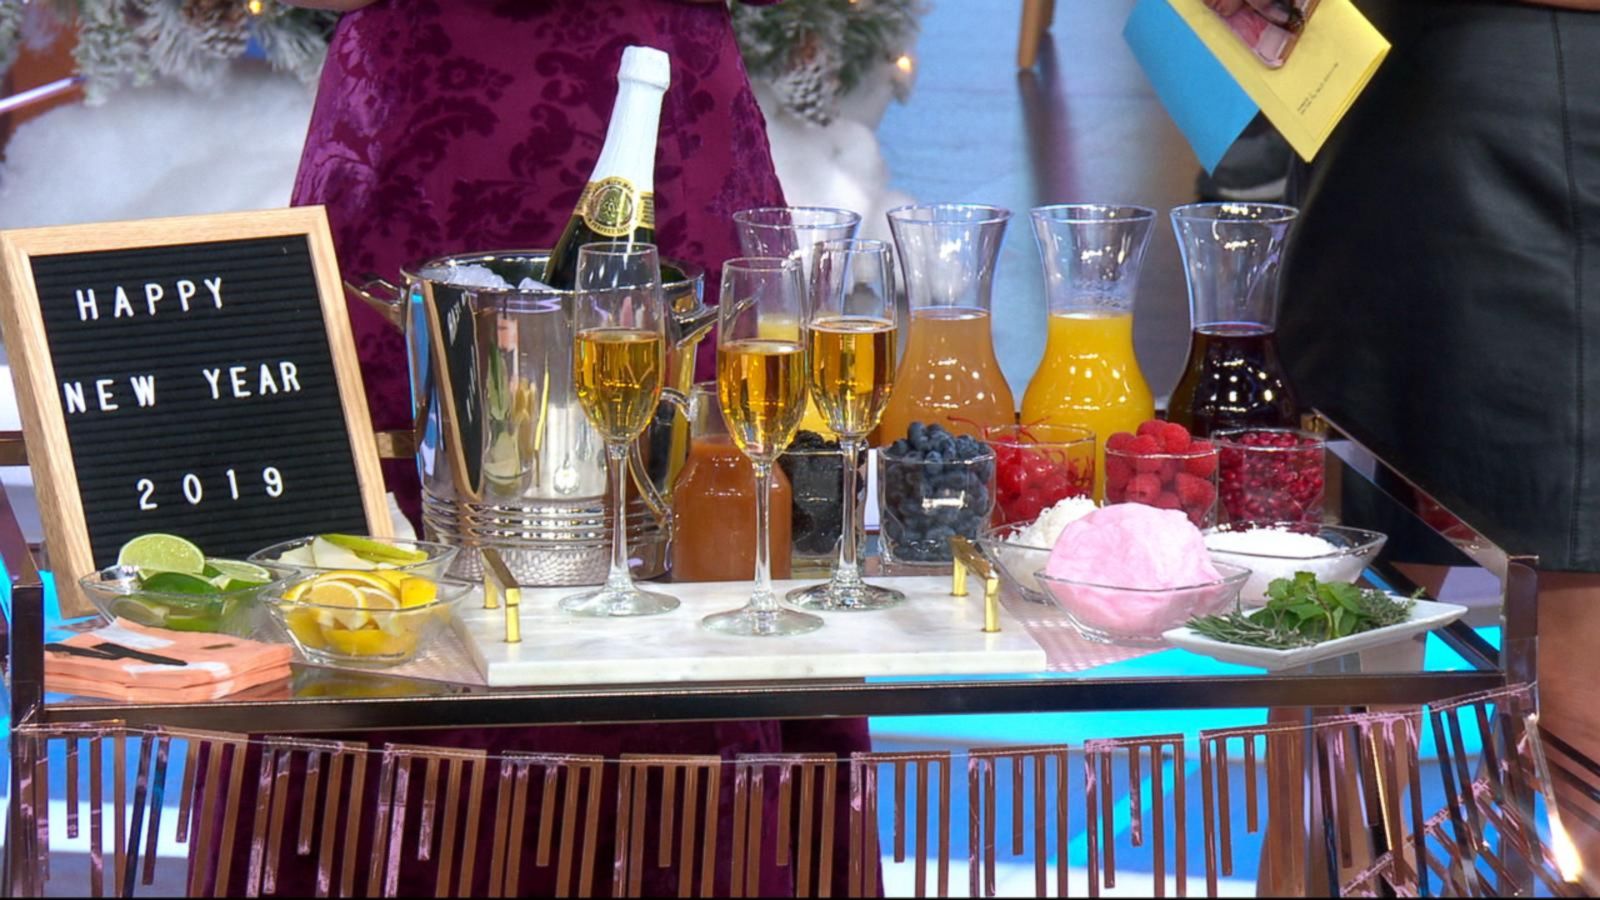 VIDEO: How to throw the ultimate New Year's Eve party